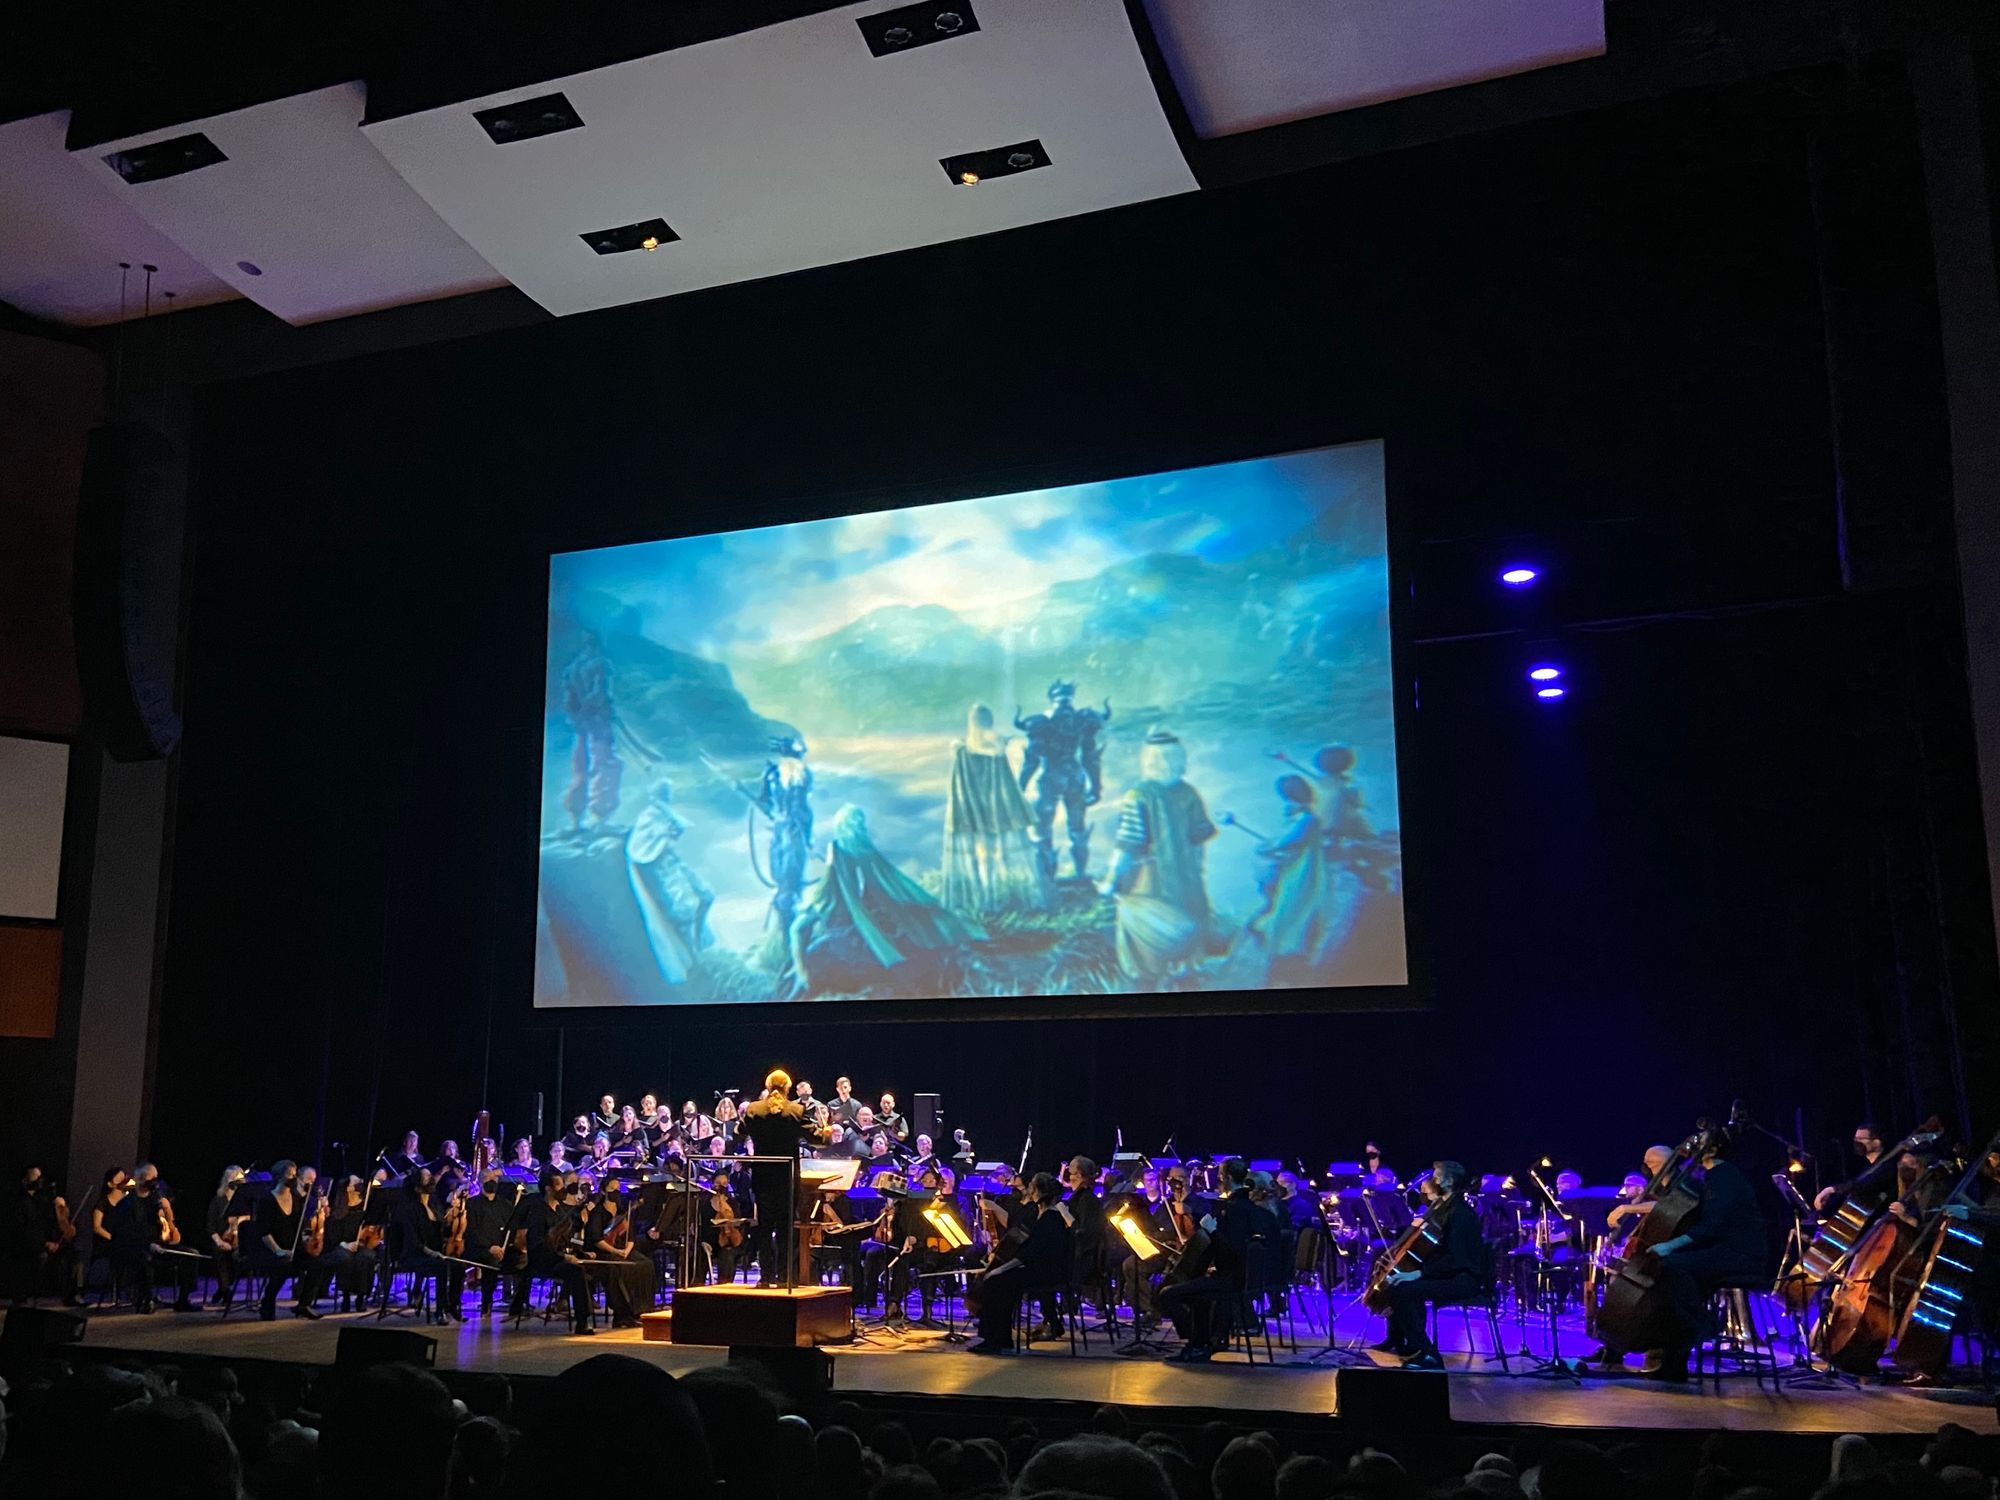 Symphony under purple lights in front of a screen showing a scene from Final Fantasy